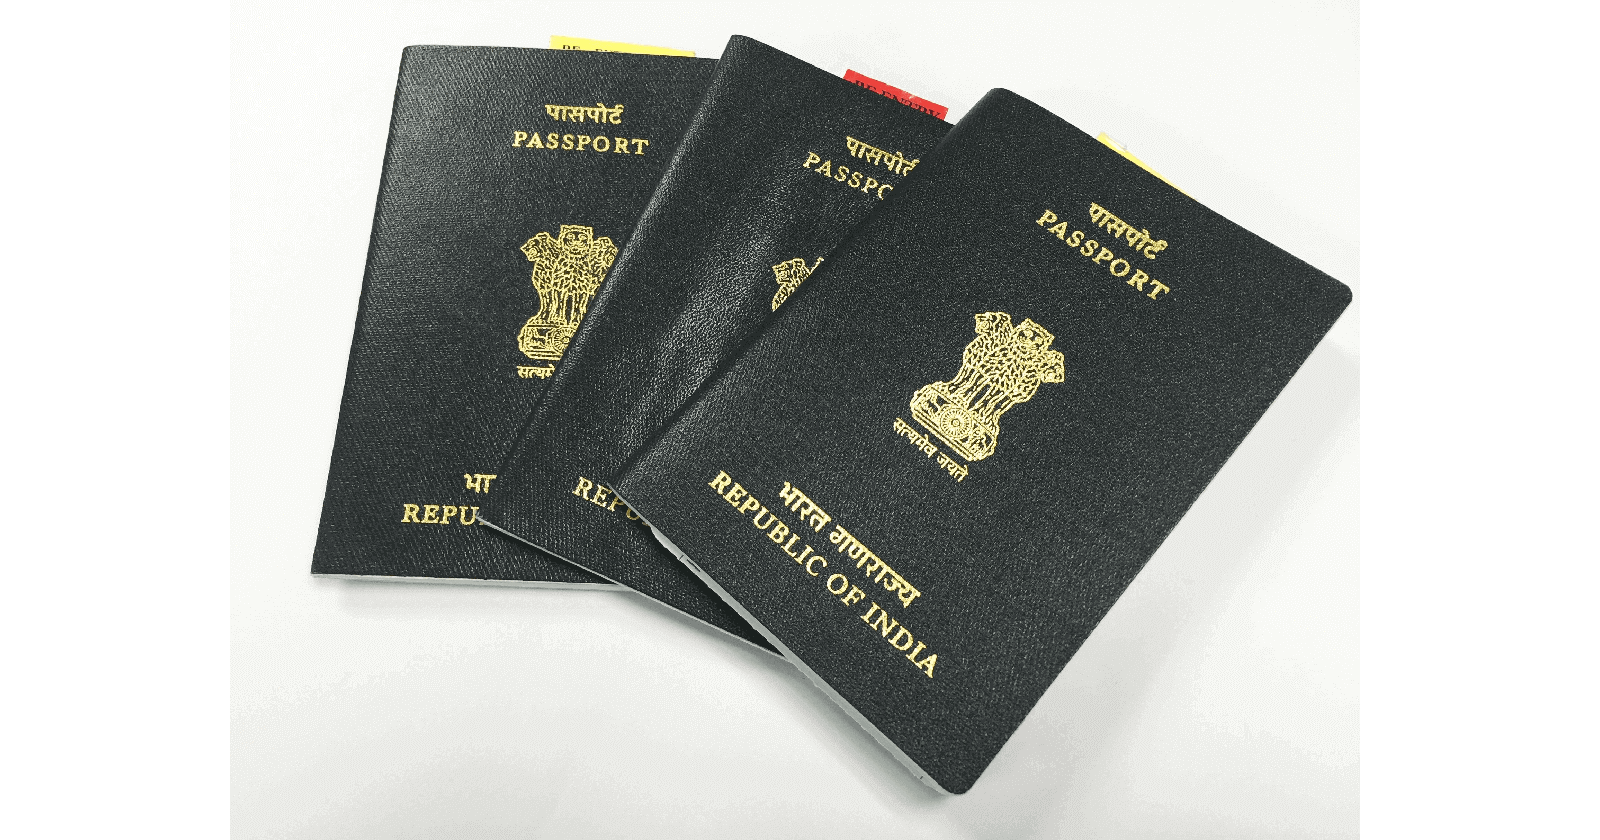 How to change your name in the passport?